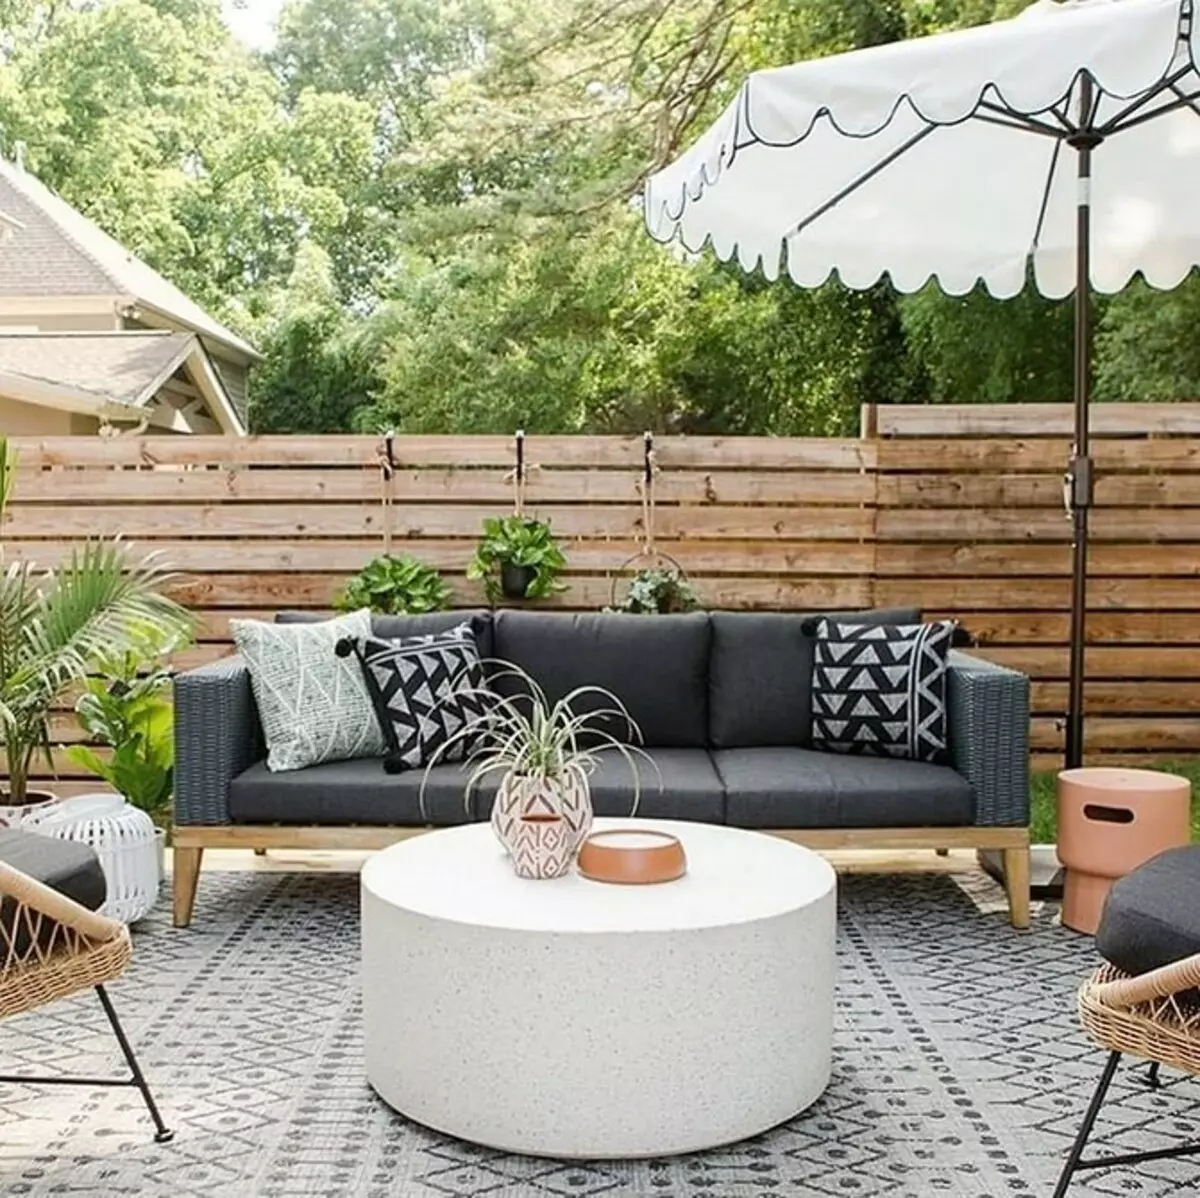 8 budget ideas for organizing a comfortable and comfortable sofa area in the garden 3312_35